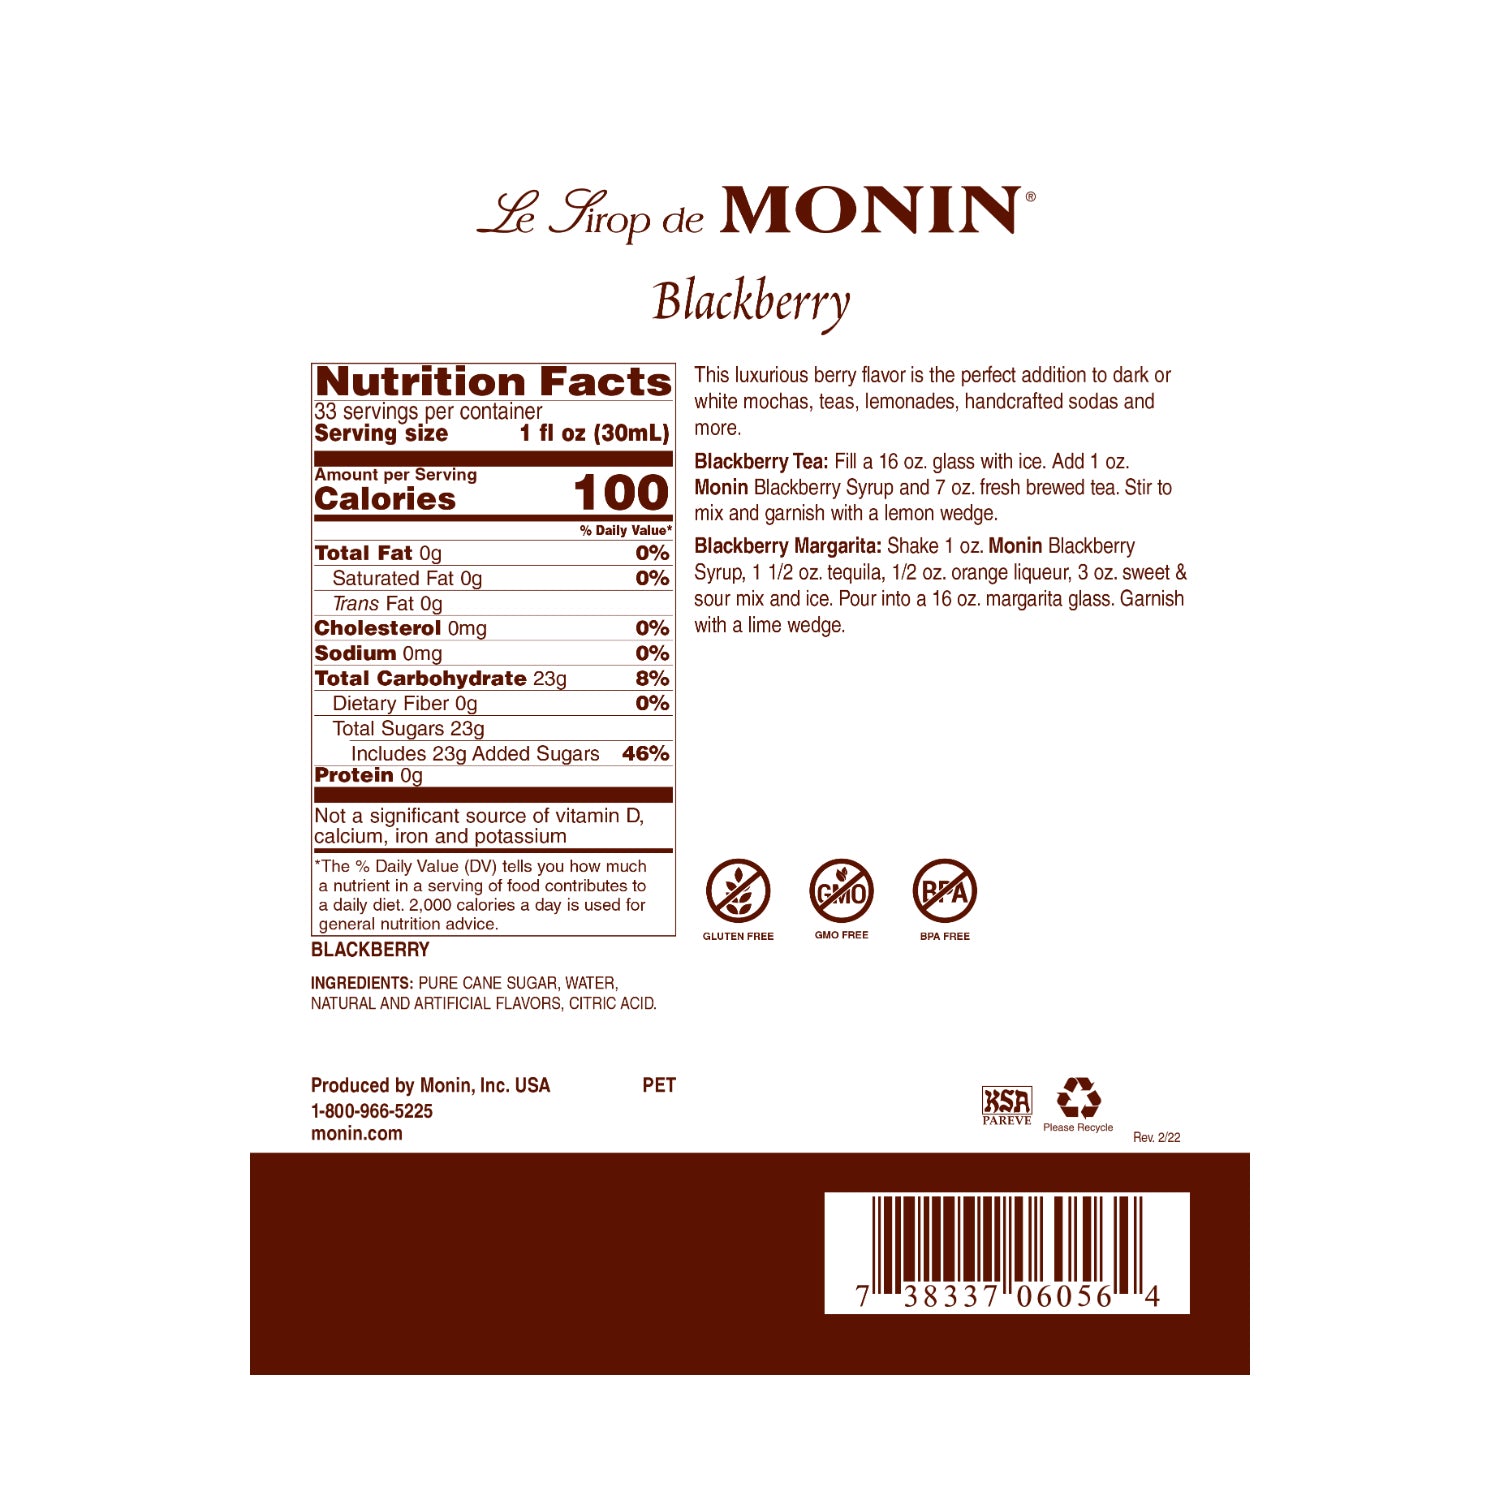 Monin Blackberry Syrup nutrition facts and directions label